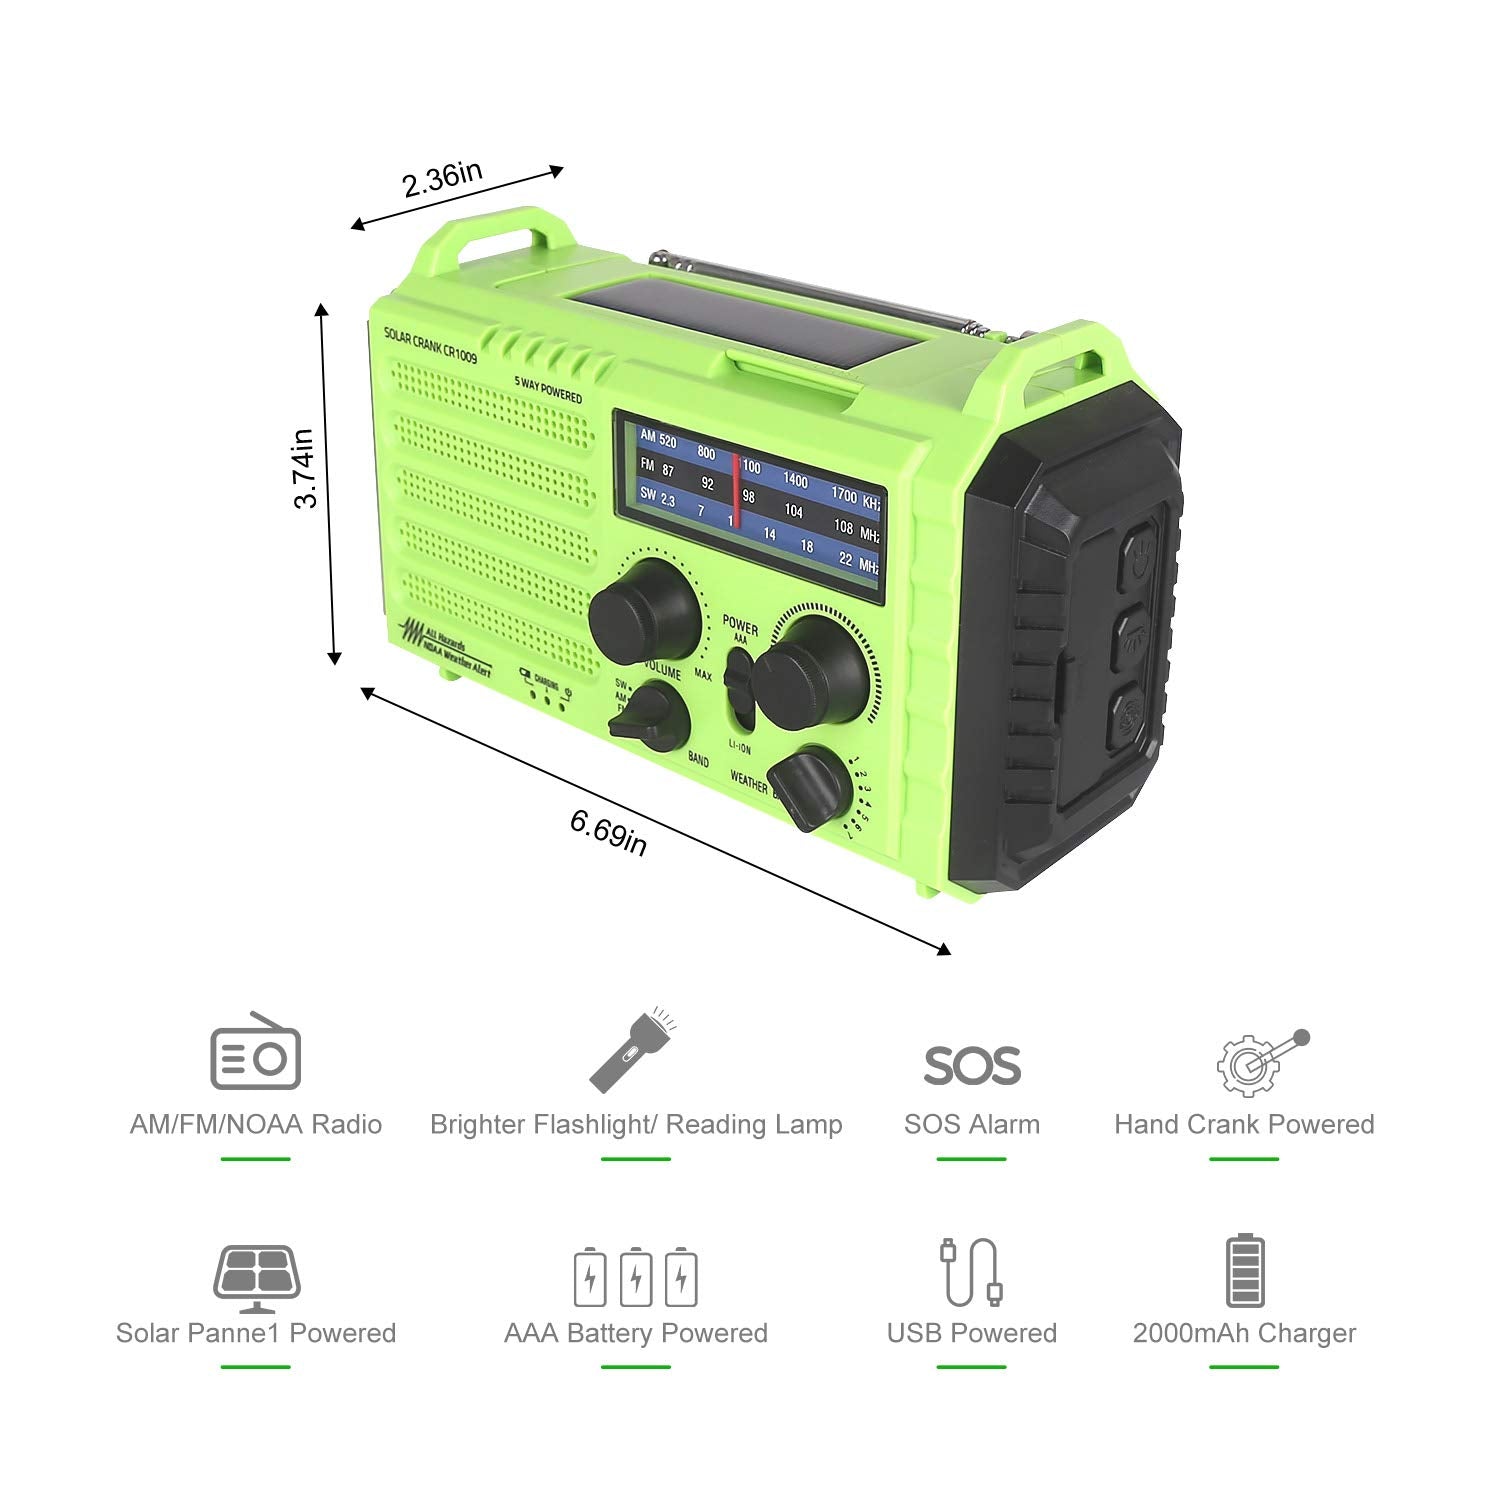 OnLyee Hand Crank Radio, Emergency Weather Solar Portable Radio 5-Way Power Sources AM/FM/SW/NOAA Weather Radio with LED Flashlight, Reading Lamp, 2000mAh Power Bank USB Phone Charger, SOS Alarm and